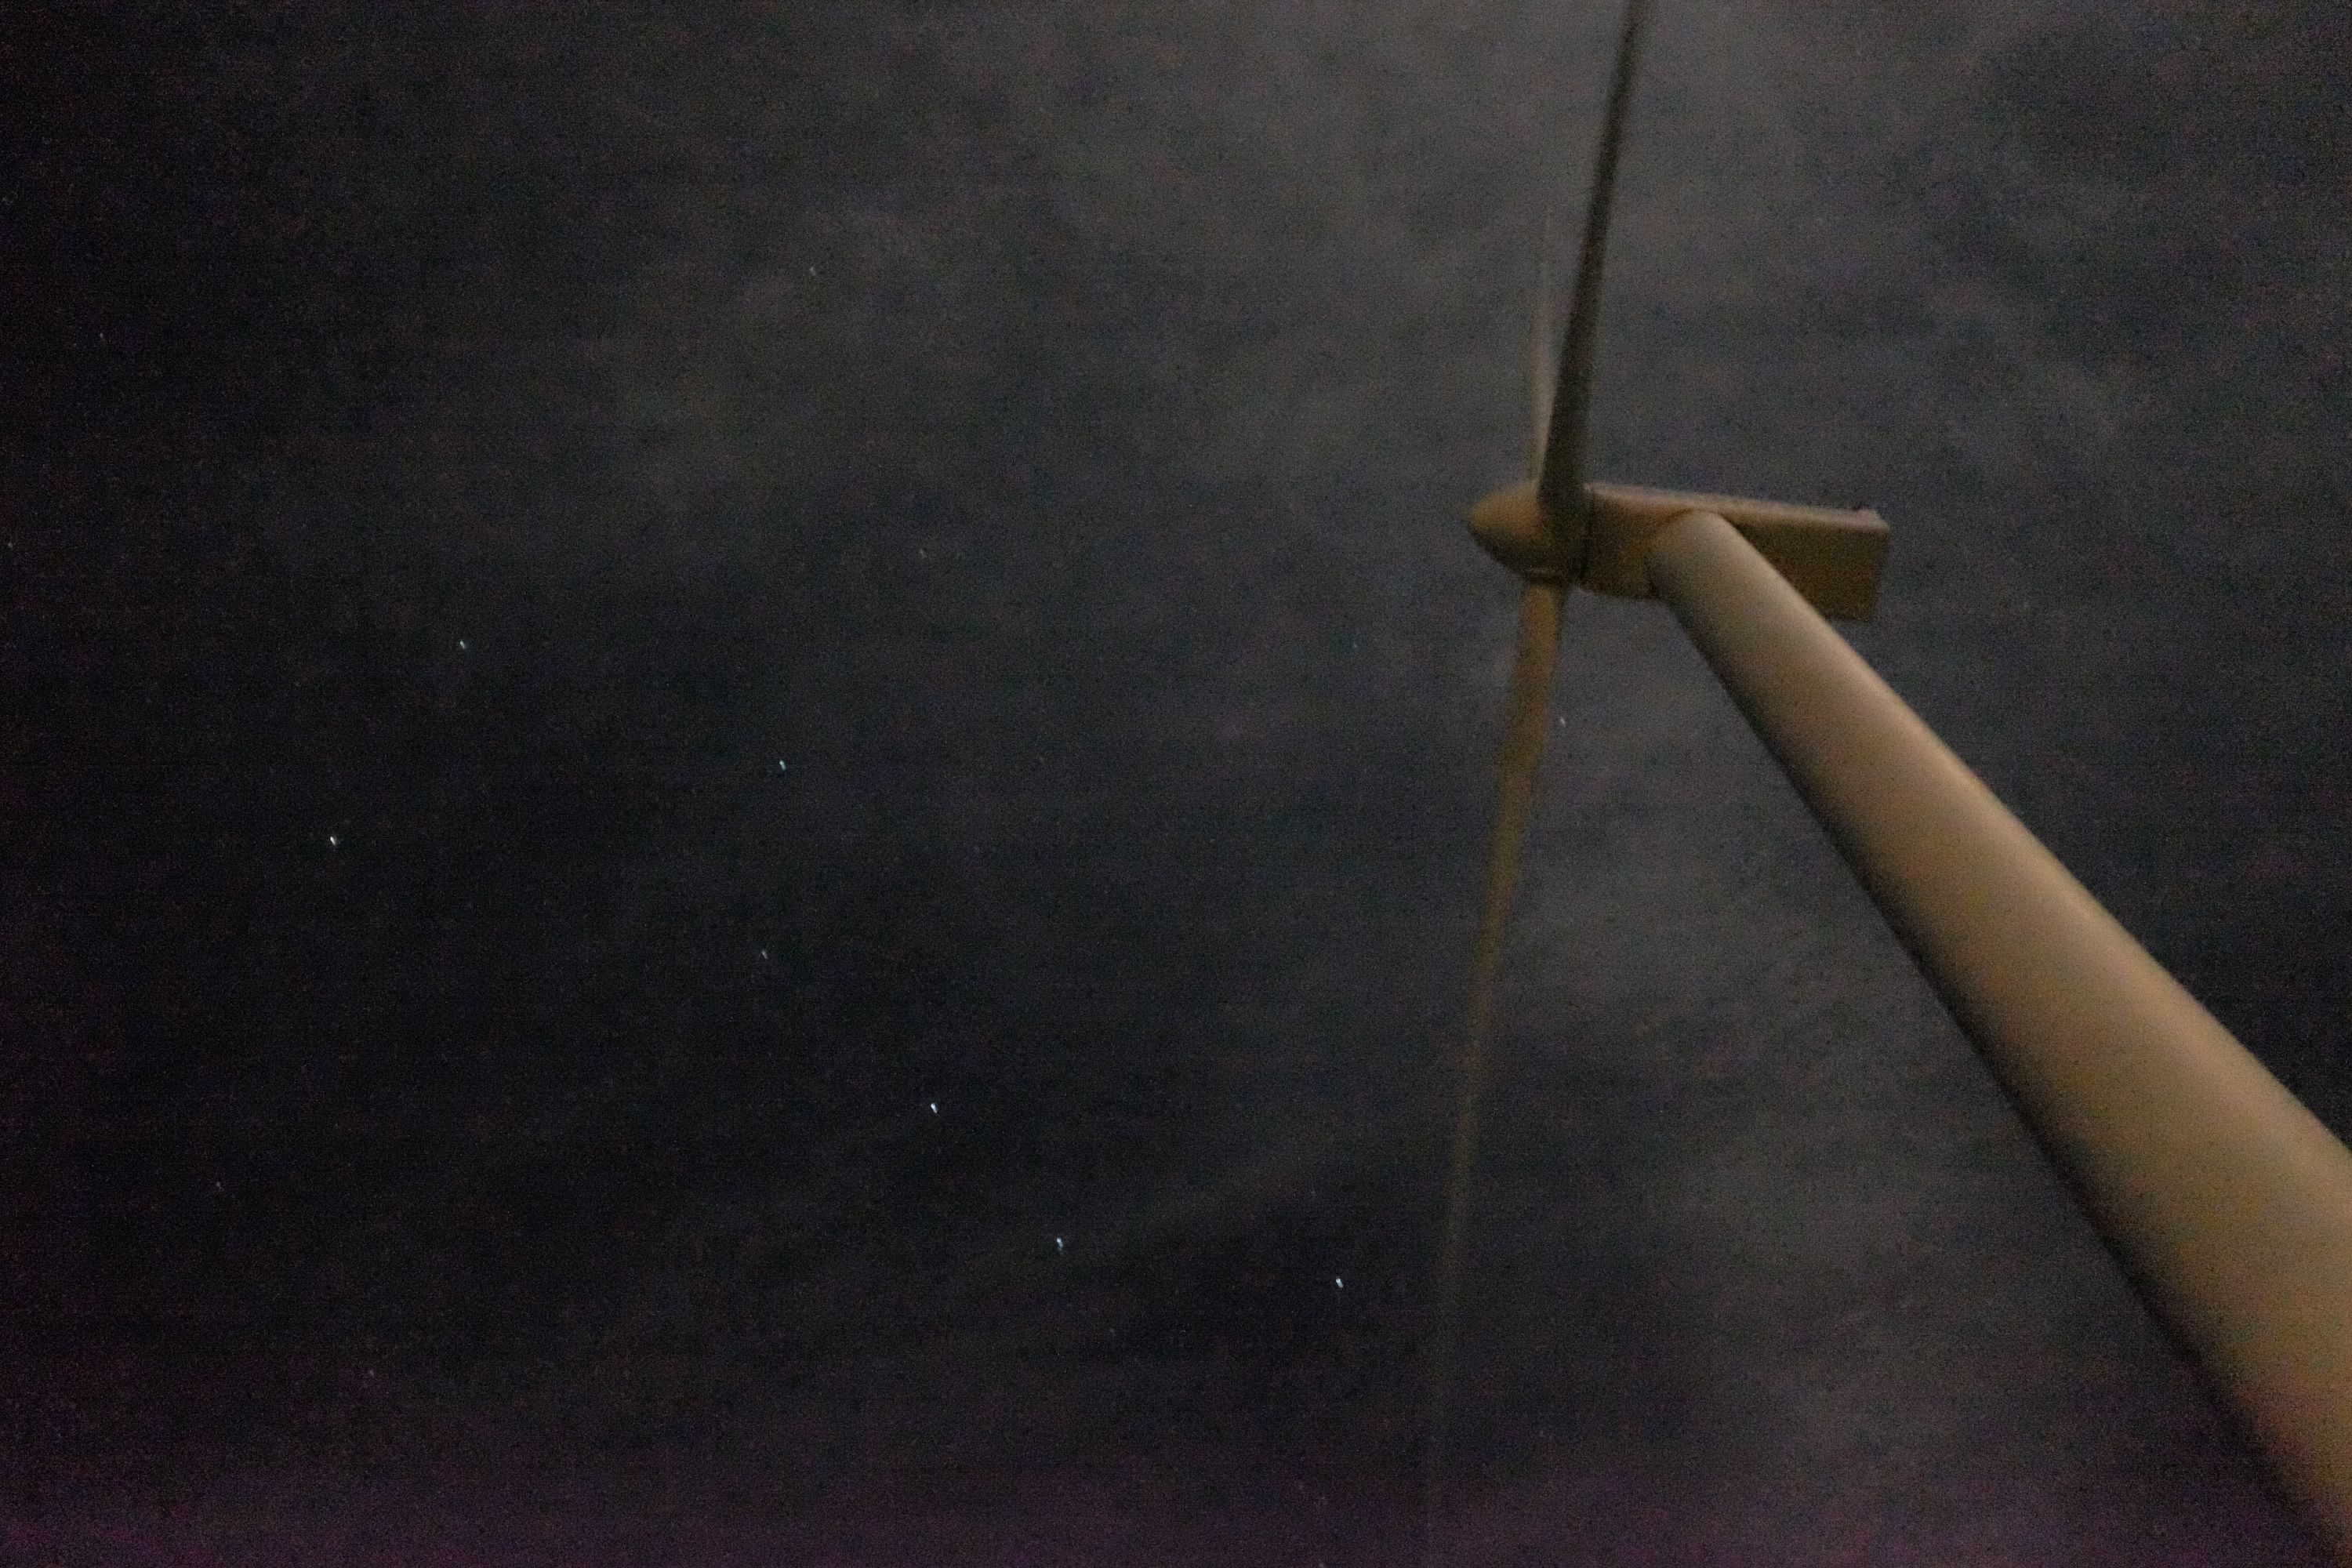 Looking up at a wind turbine at night, the constallation Ursa Major visible by its blades in the night sky.